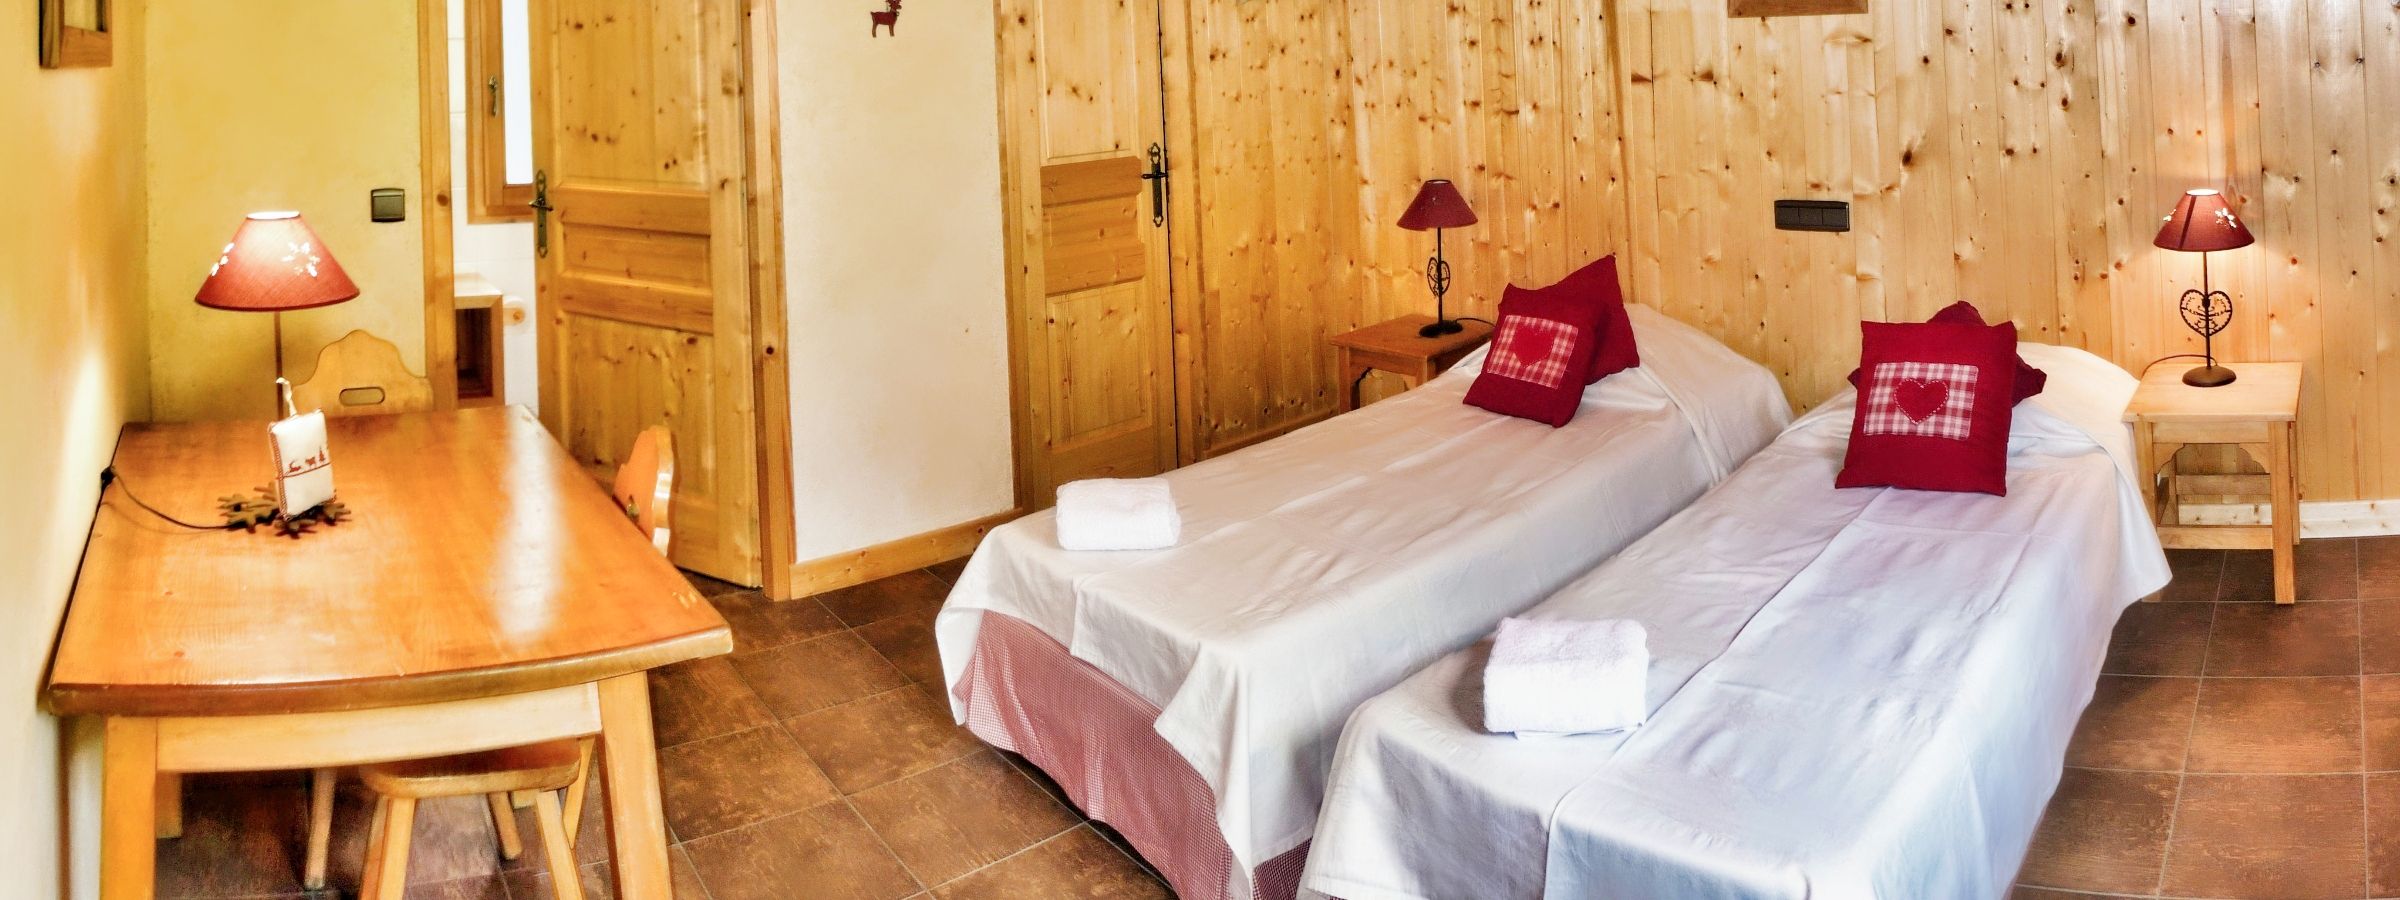 The bedrooms in Chalet Clovis are nicely decorated in a savoyard Style